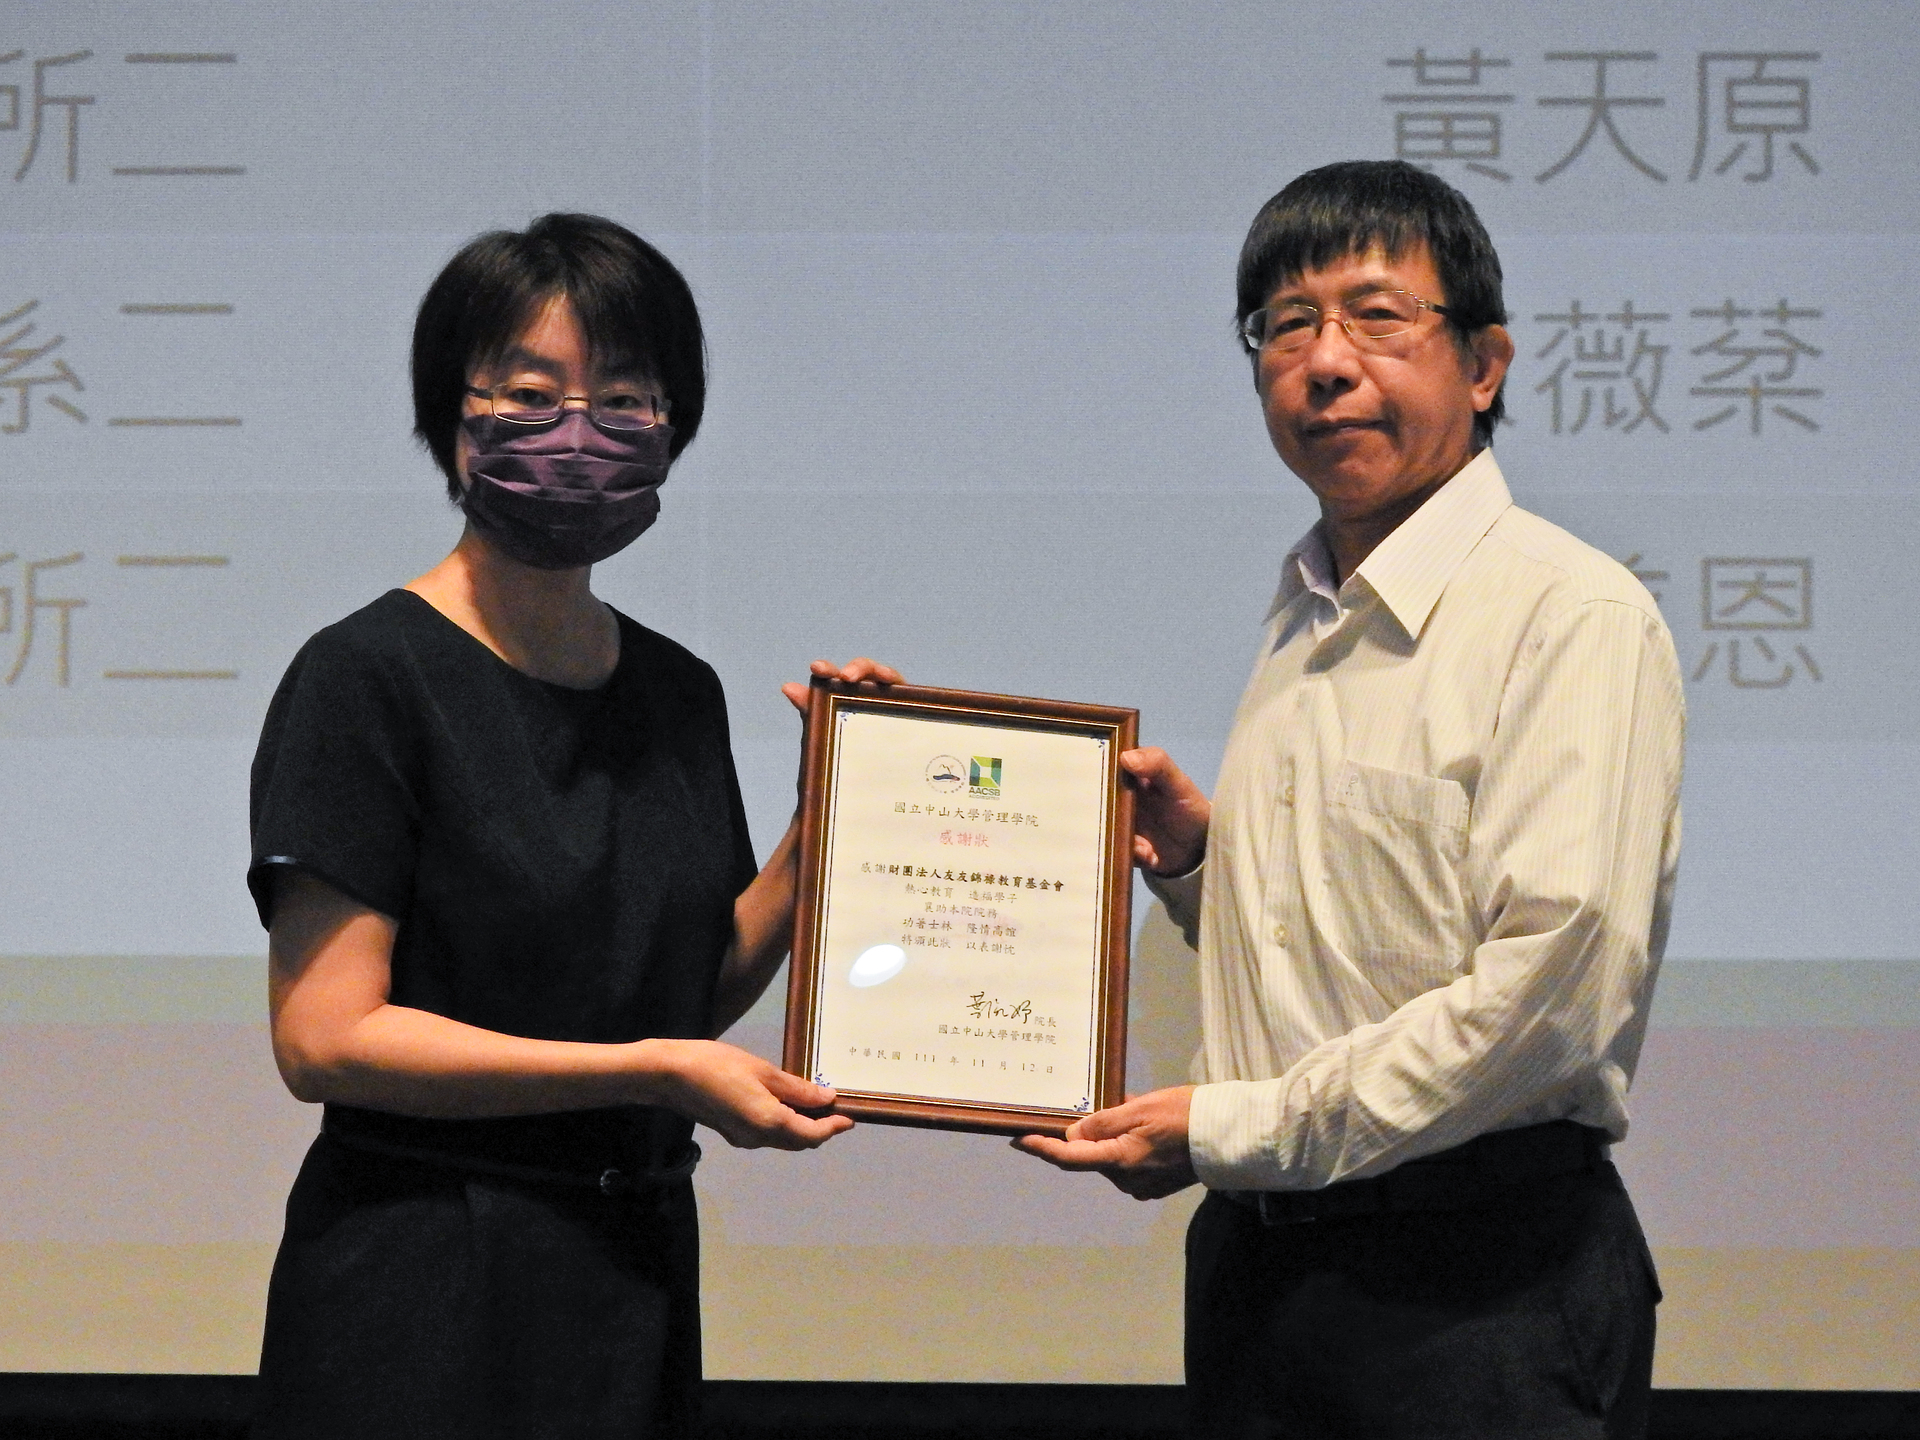 On the left is Vice President Su-chao Tsai, and on the right is Associate Dean of the College of Management Anlin Chen presenting a certificate of appreciation